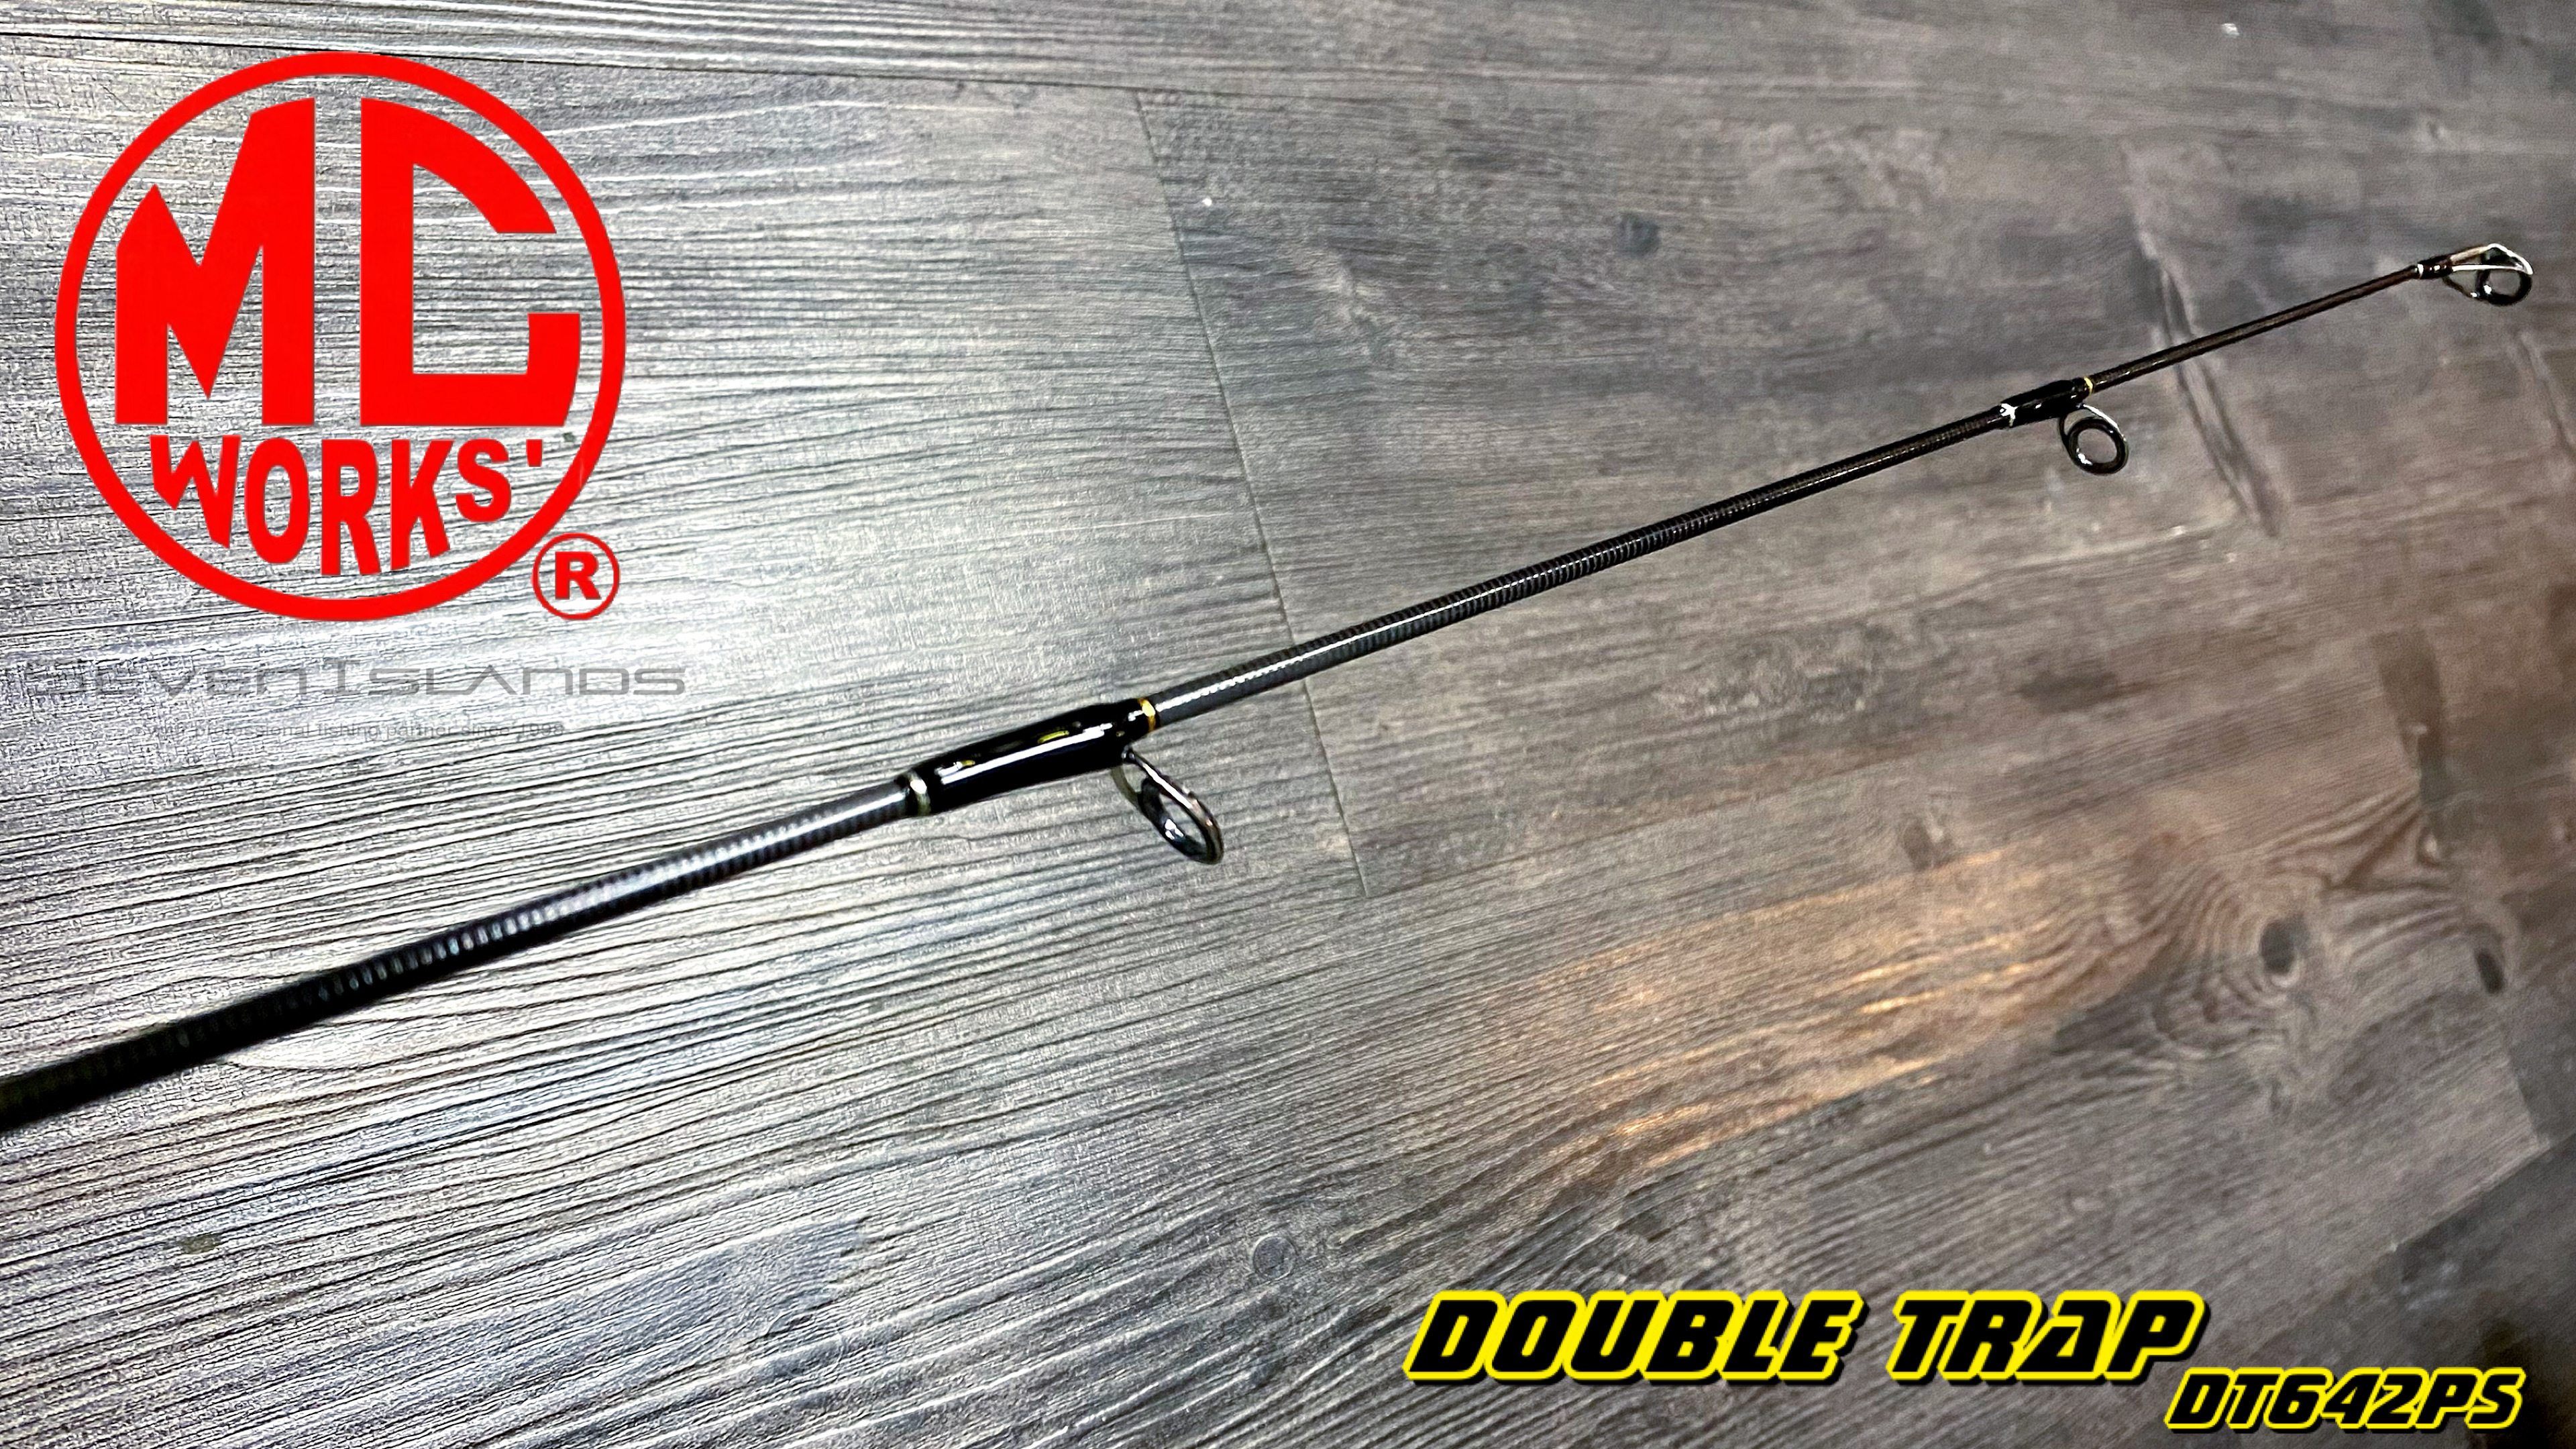 MC WORKS DOUBLE TRAP 642PS JIGGING ROD DT642PS